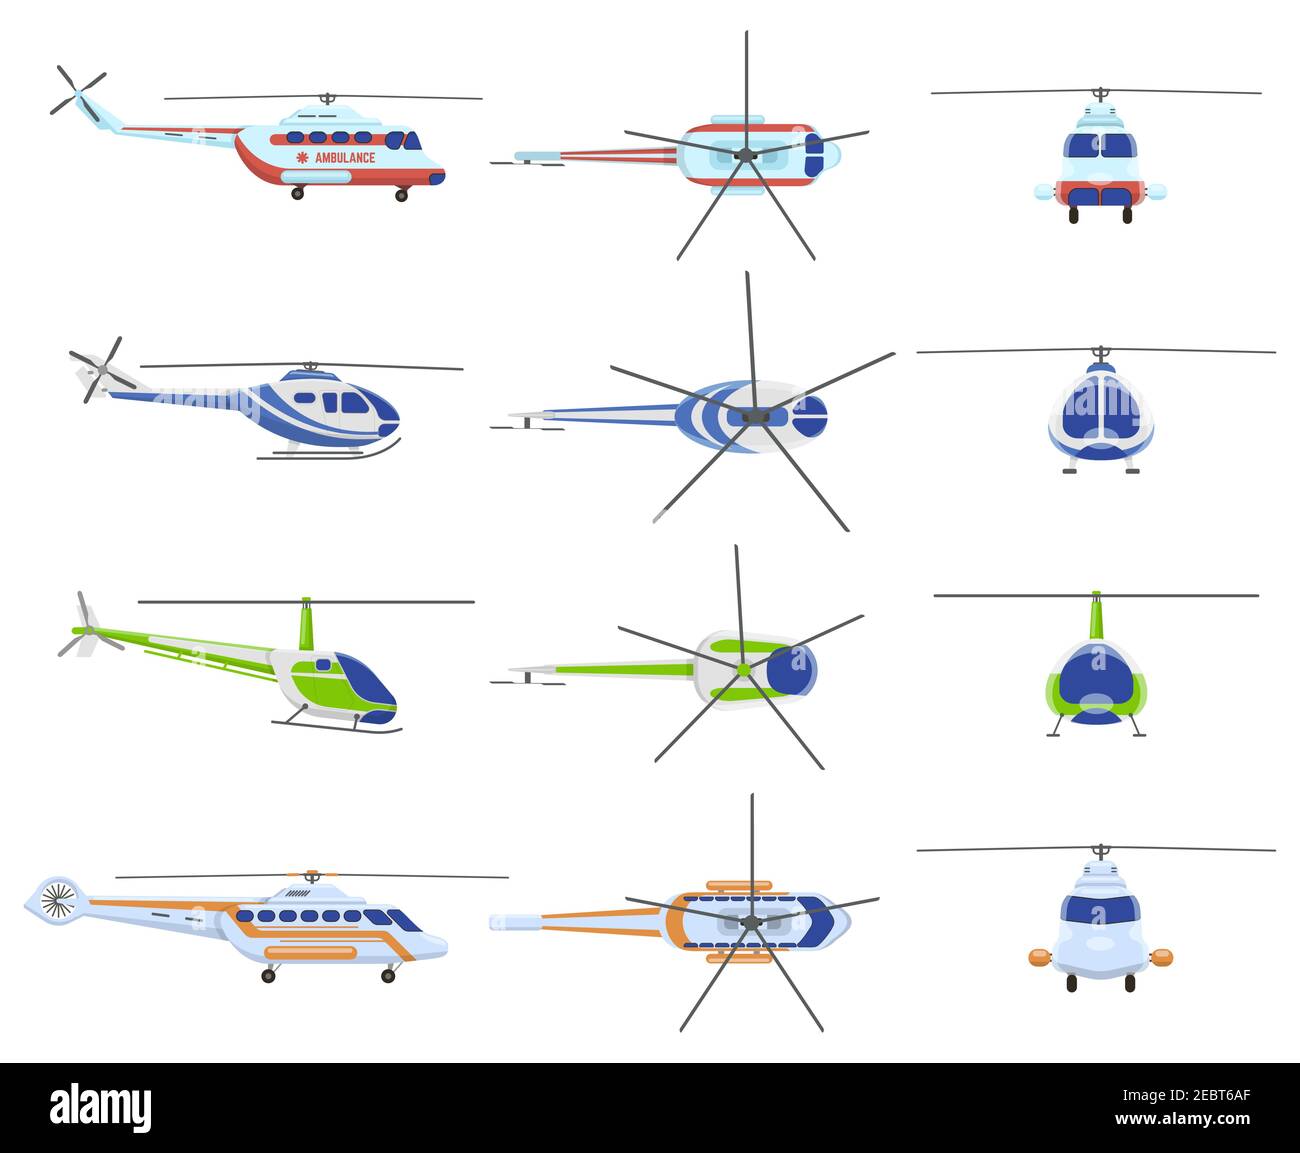 Helicopter aircraft vehicles. Avia transportation, city urban, private and medical rescue helicopter. Helicopter aviation vector illustration set Stock Vector